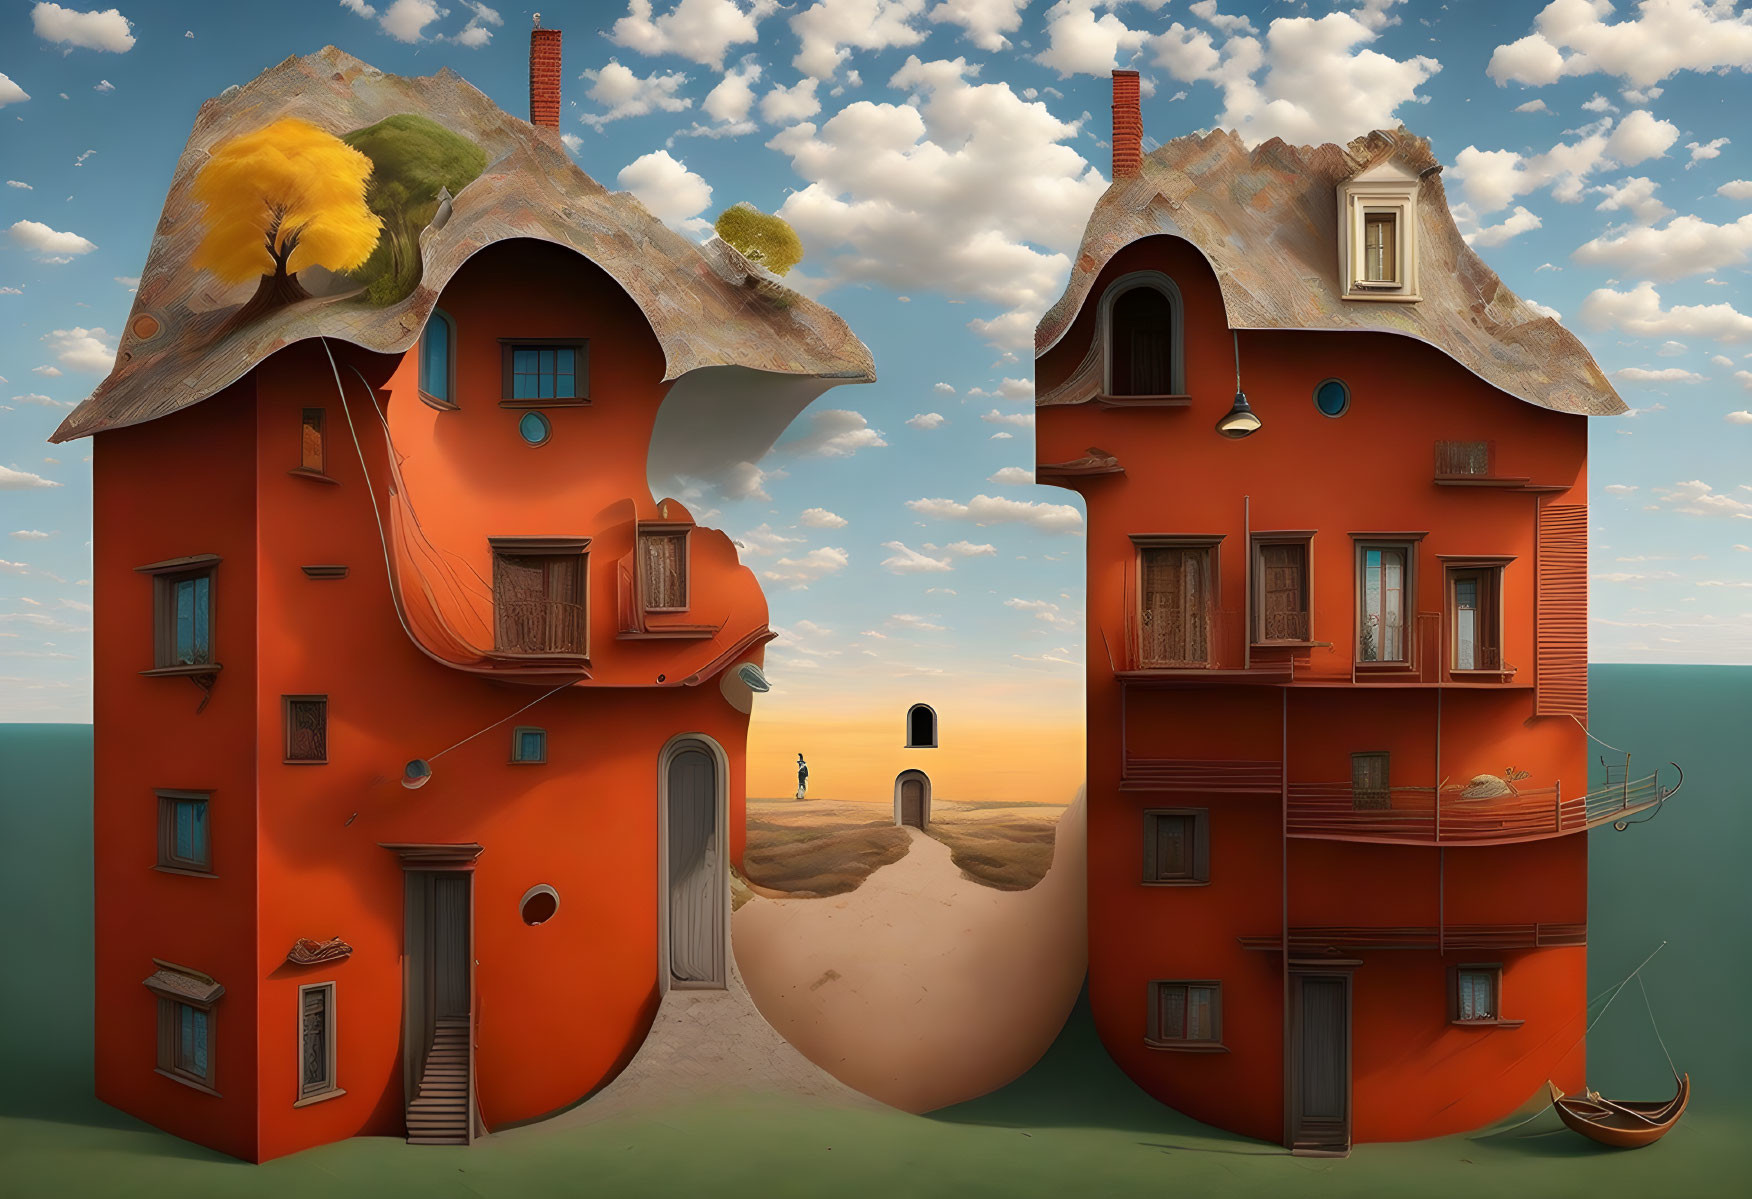 Whimsical orange buildings with eyes and mouths on sand hills under blue sky